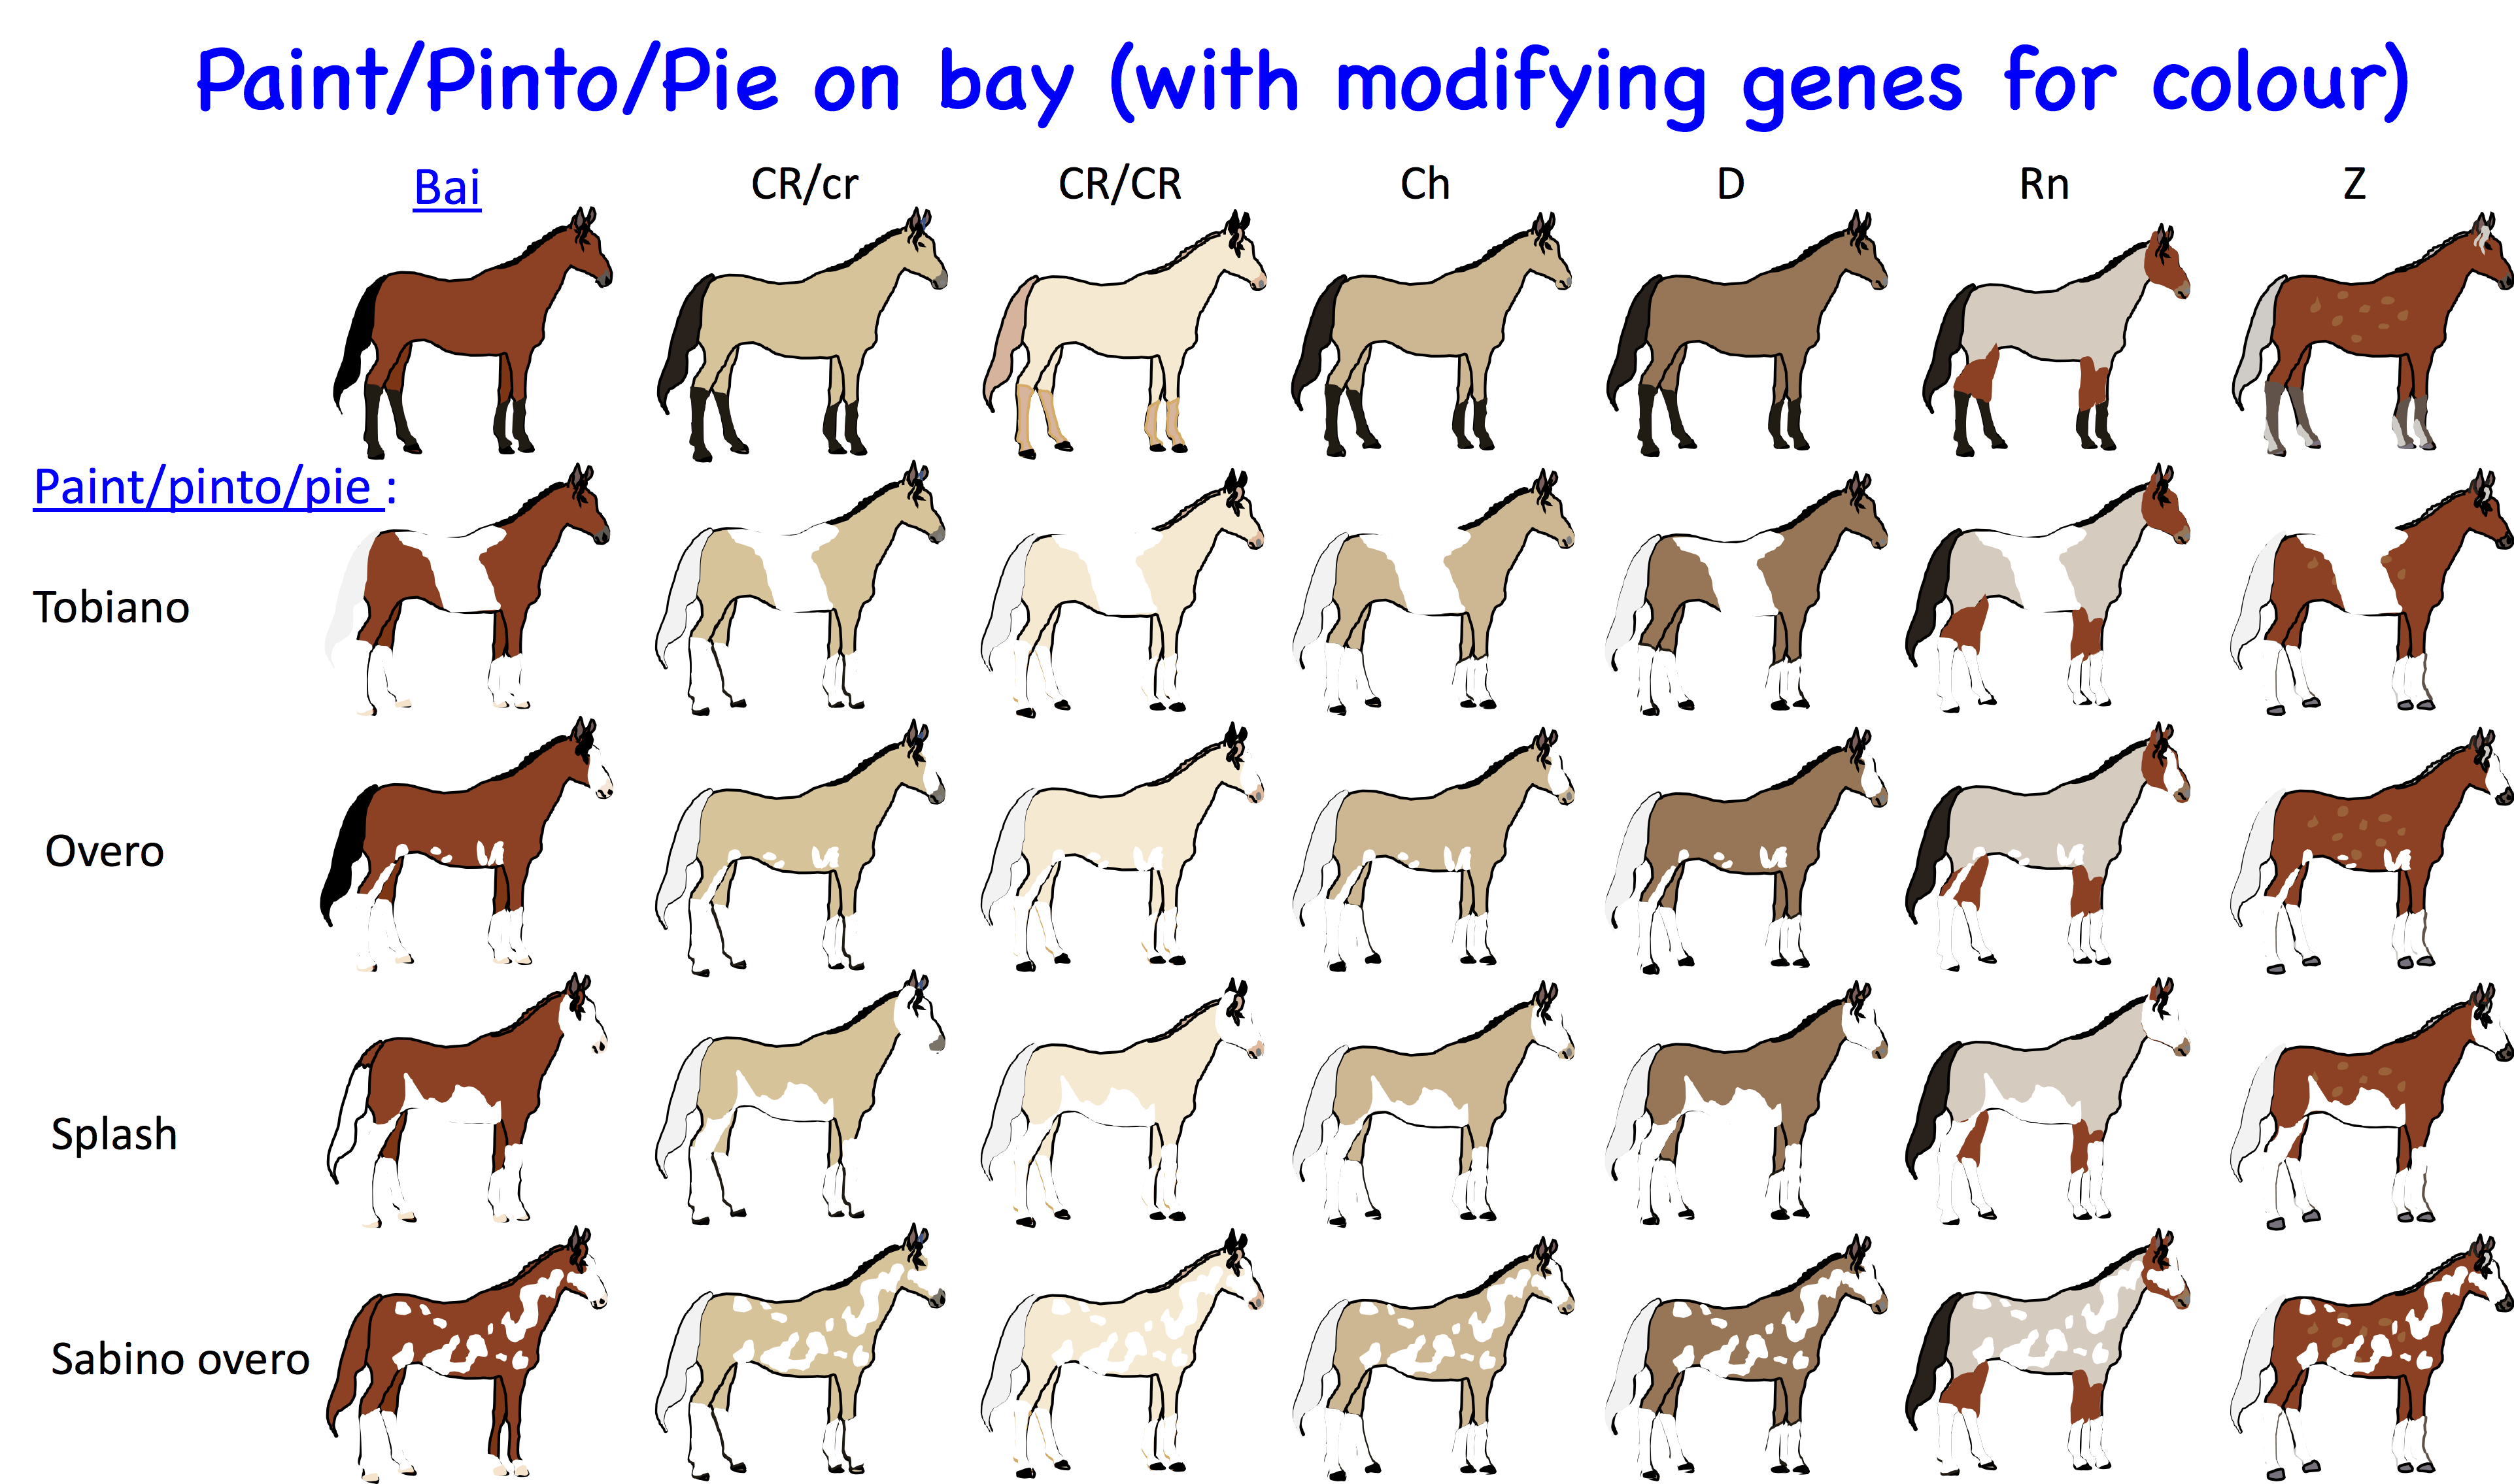 Horse coat colours and patterns